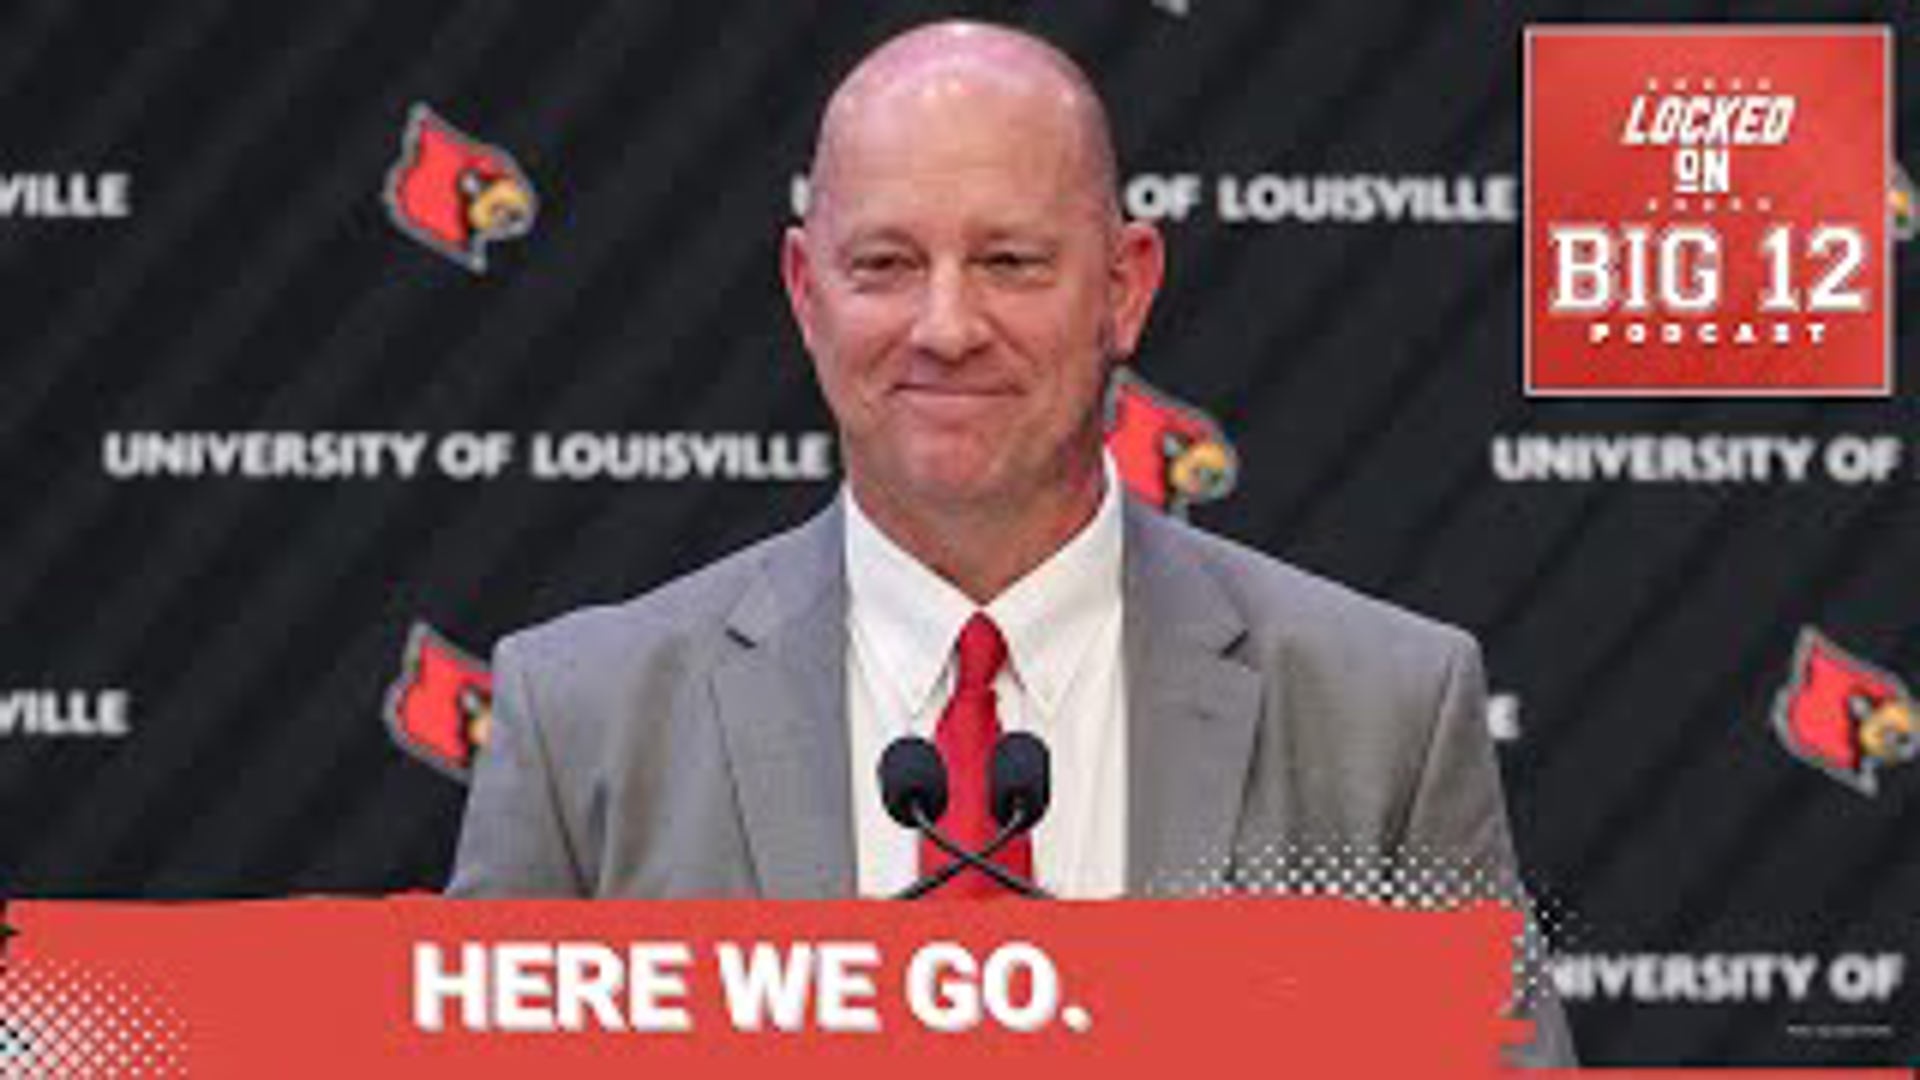 If Louisville were to join the Big 12 conference, it would likely have significant implications for both the university and the conference as a whole.